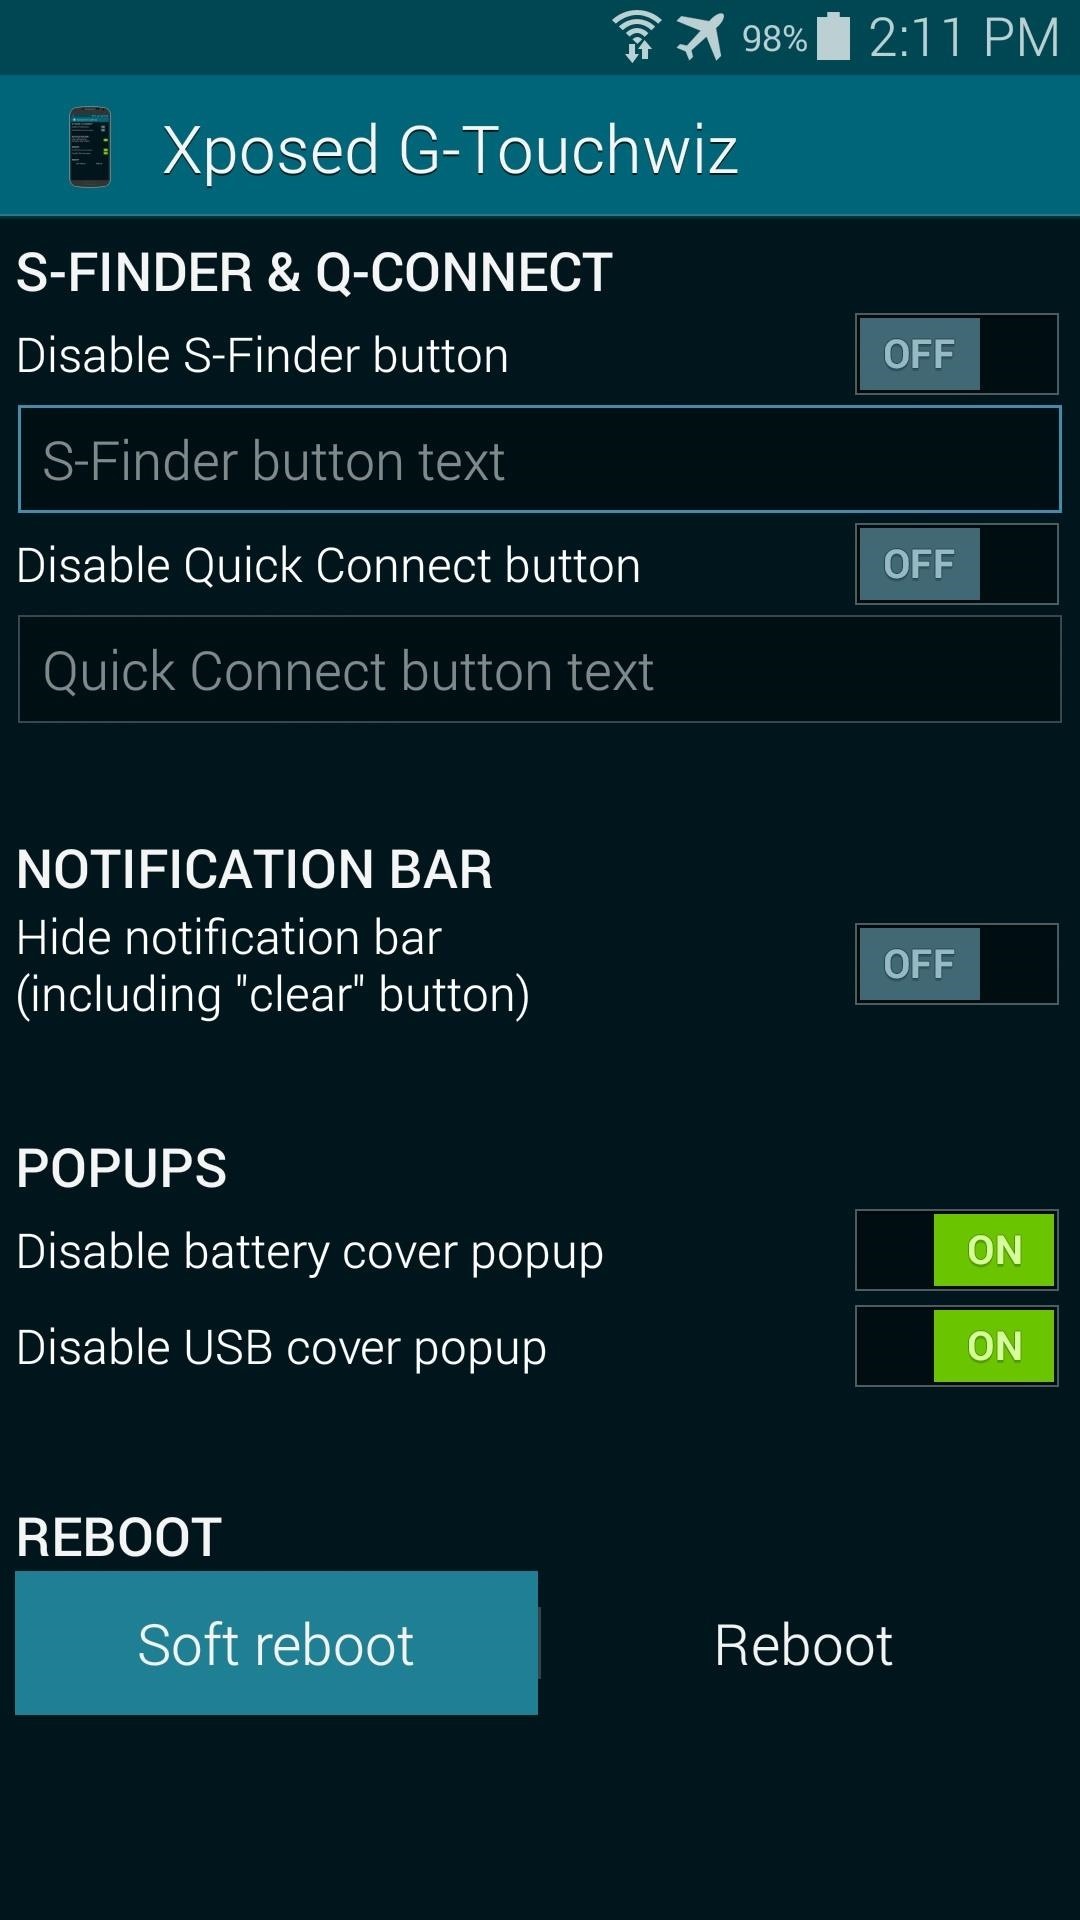 How to Disable Those Annoying "Water Damage" Popup Reminders on Your Galaxy S5